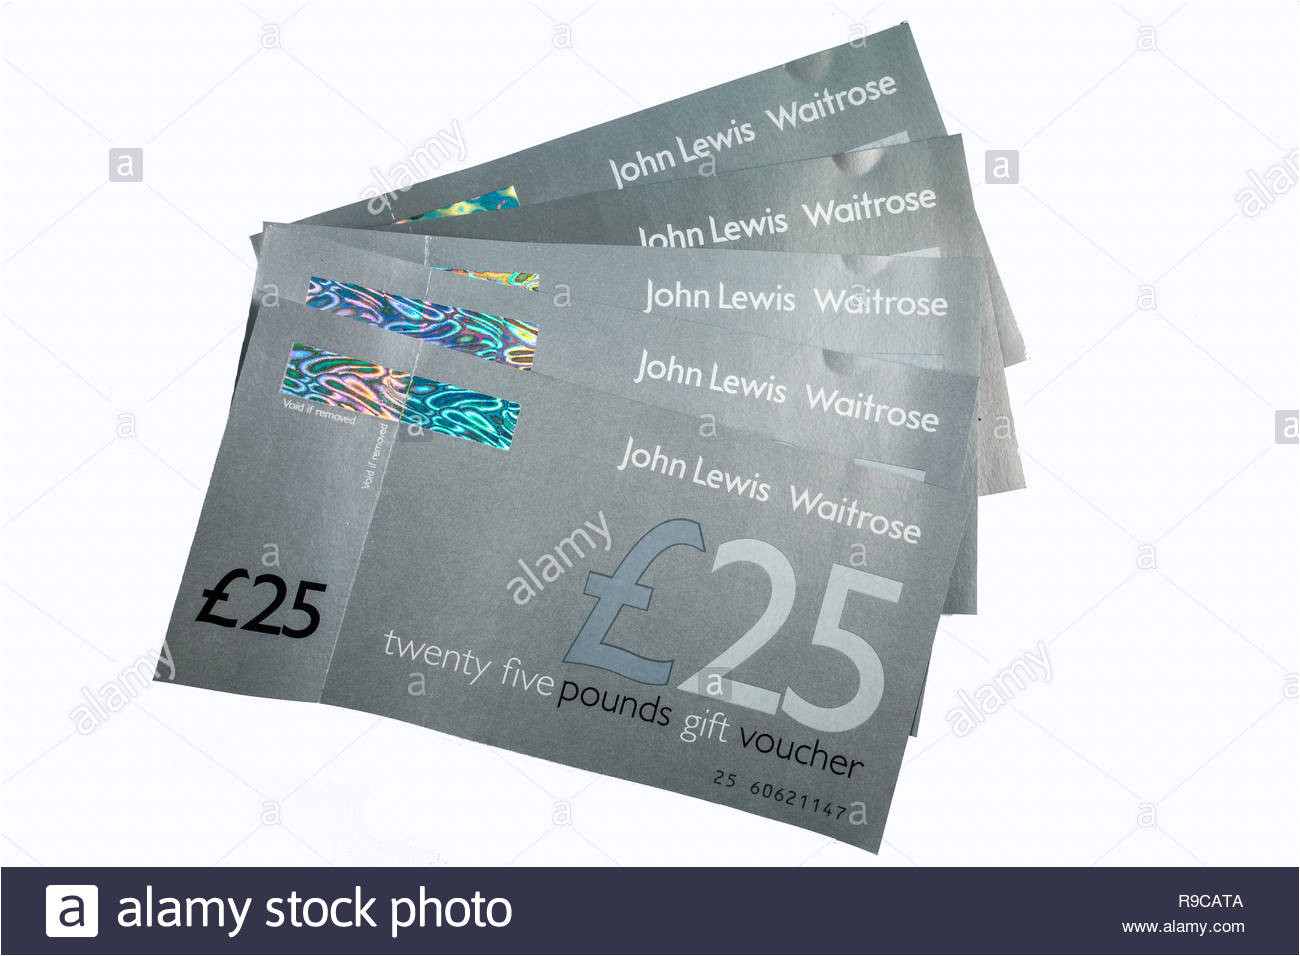 john lewis and waitrose gift vouchers given as a reward for spending on the jlp partnership credit card r9cata jpg